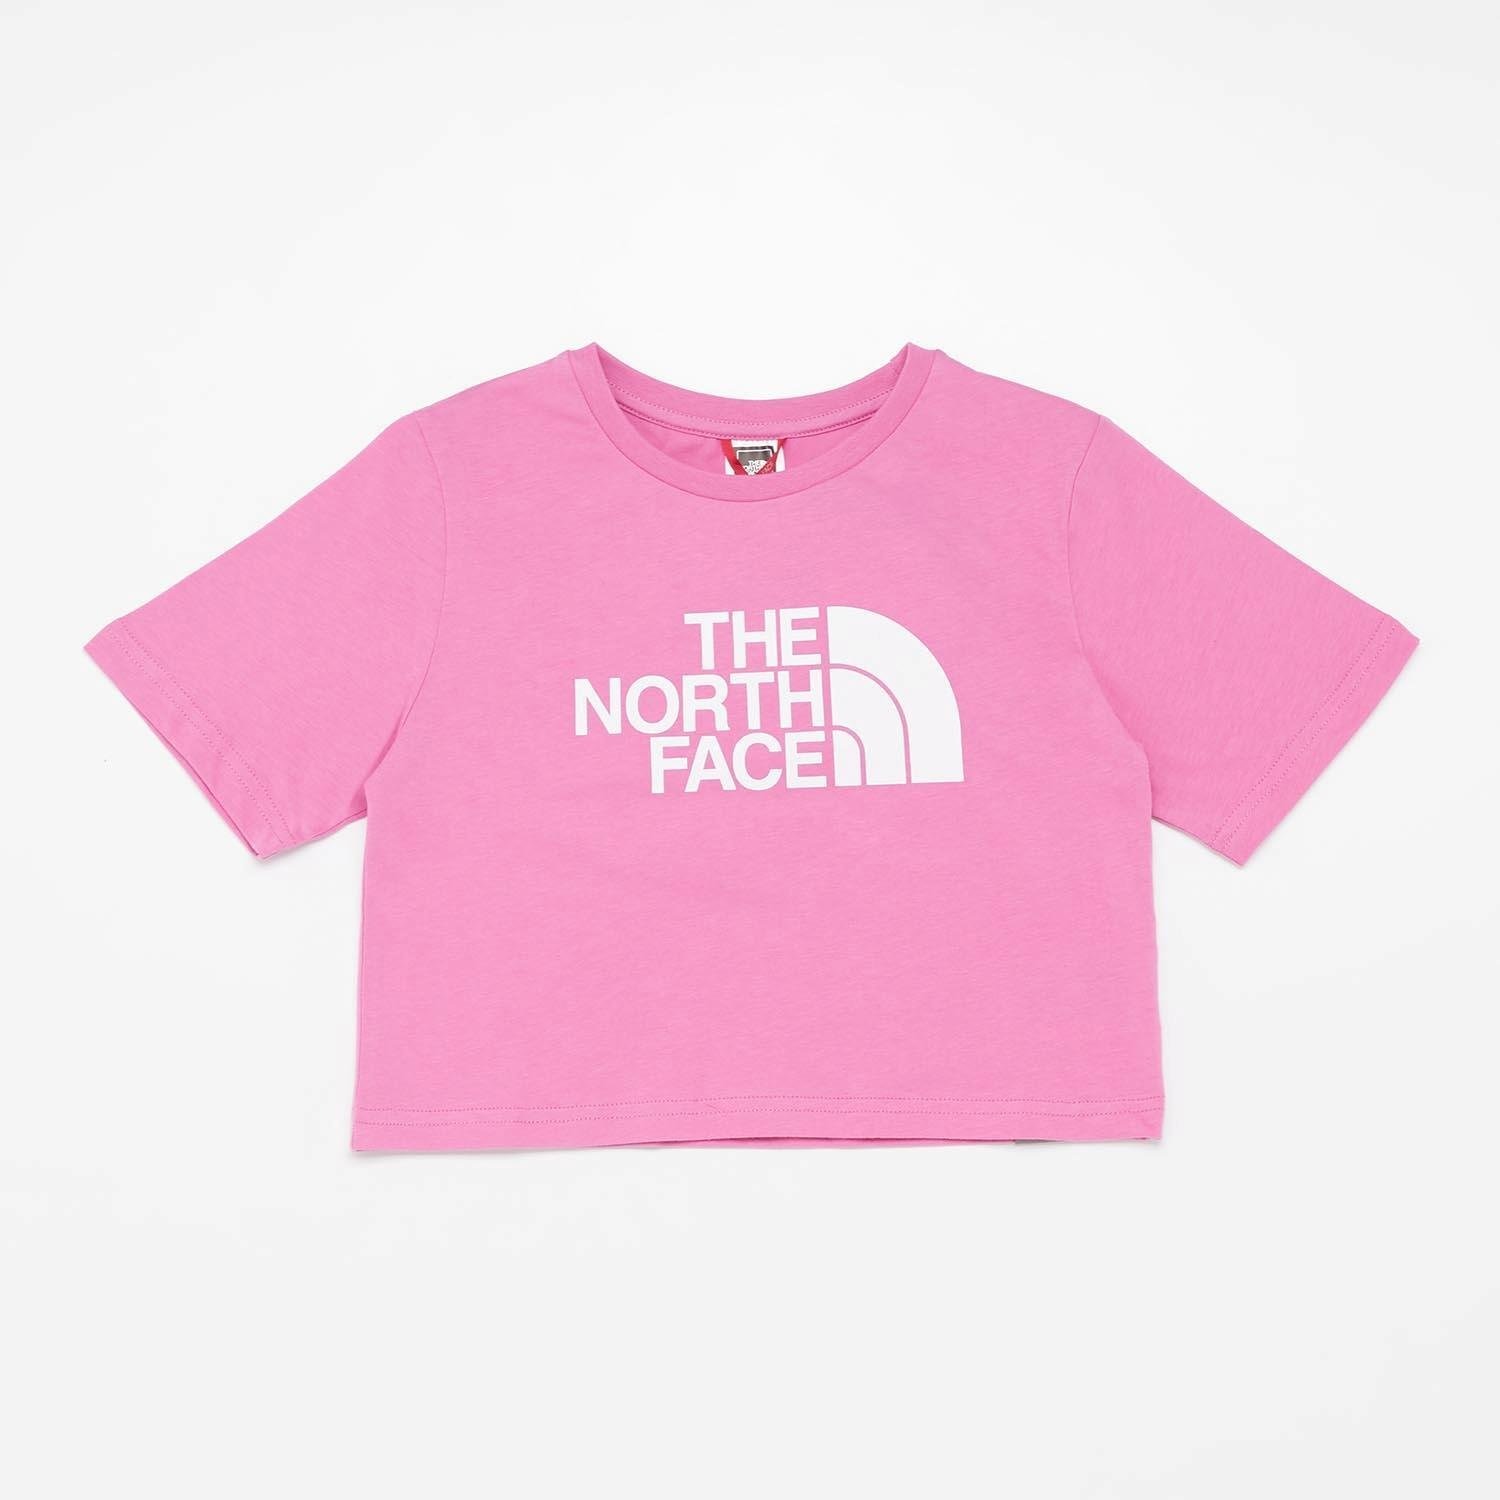 The North Face The north face easy crop shirt roze kinderen kinderen